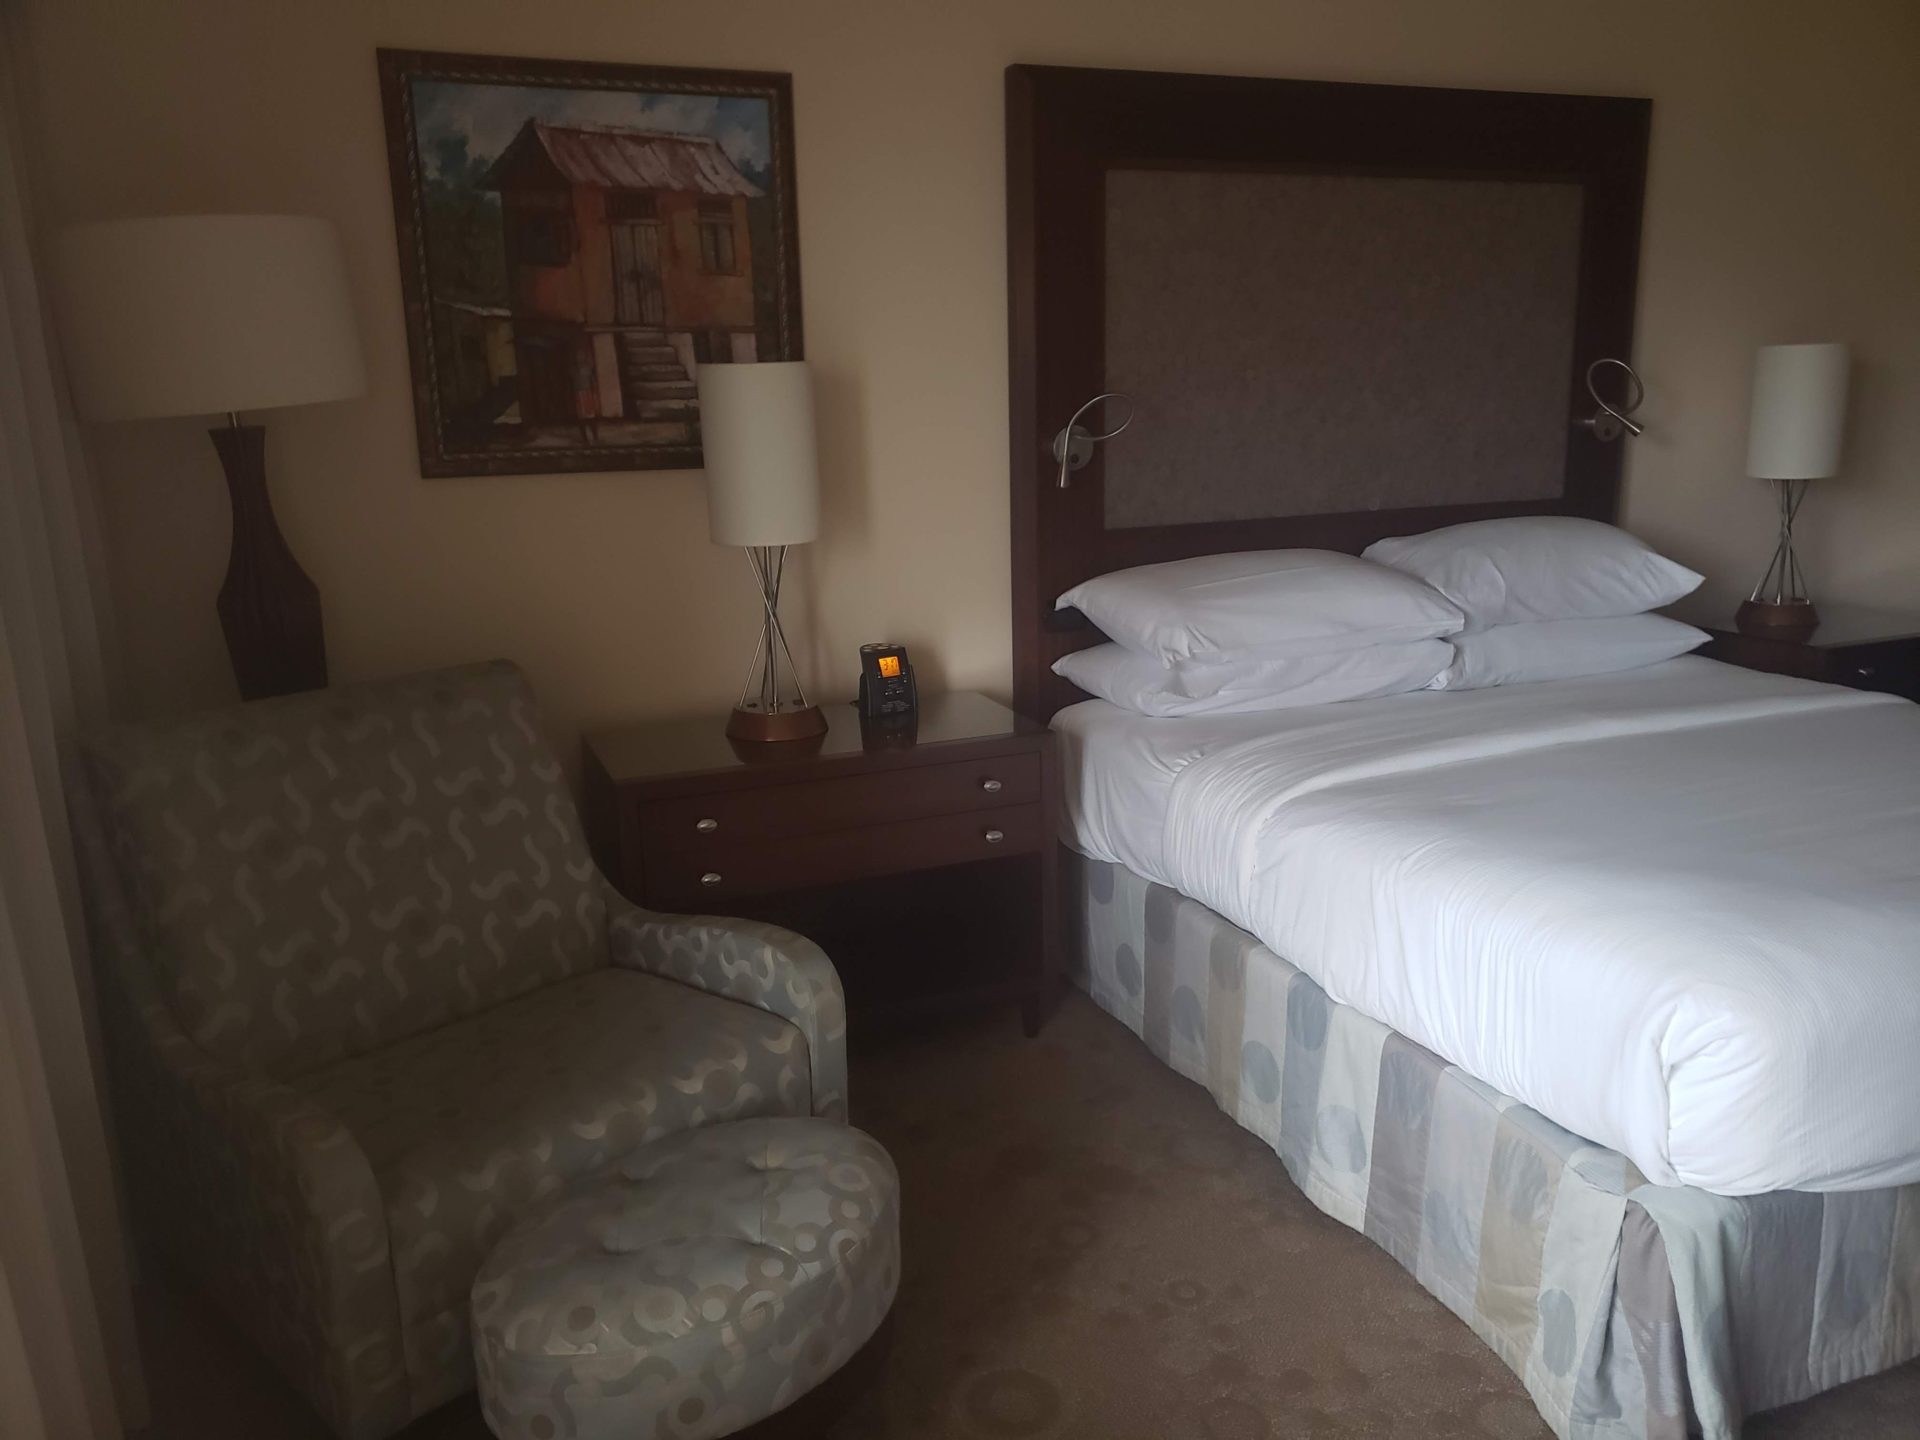 a bed and chair in a hotel room